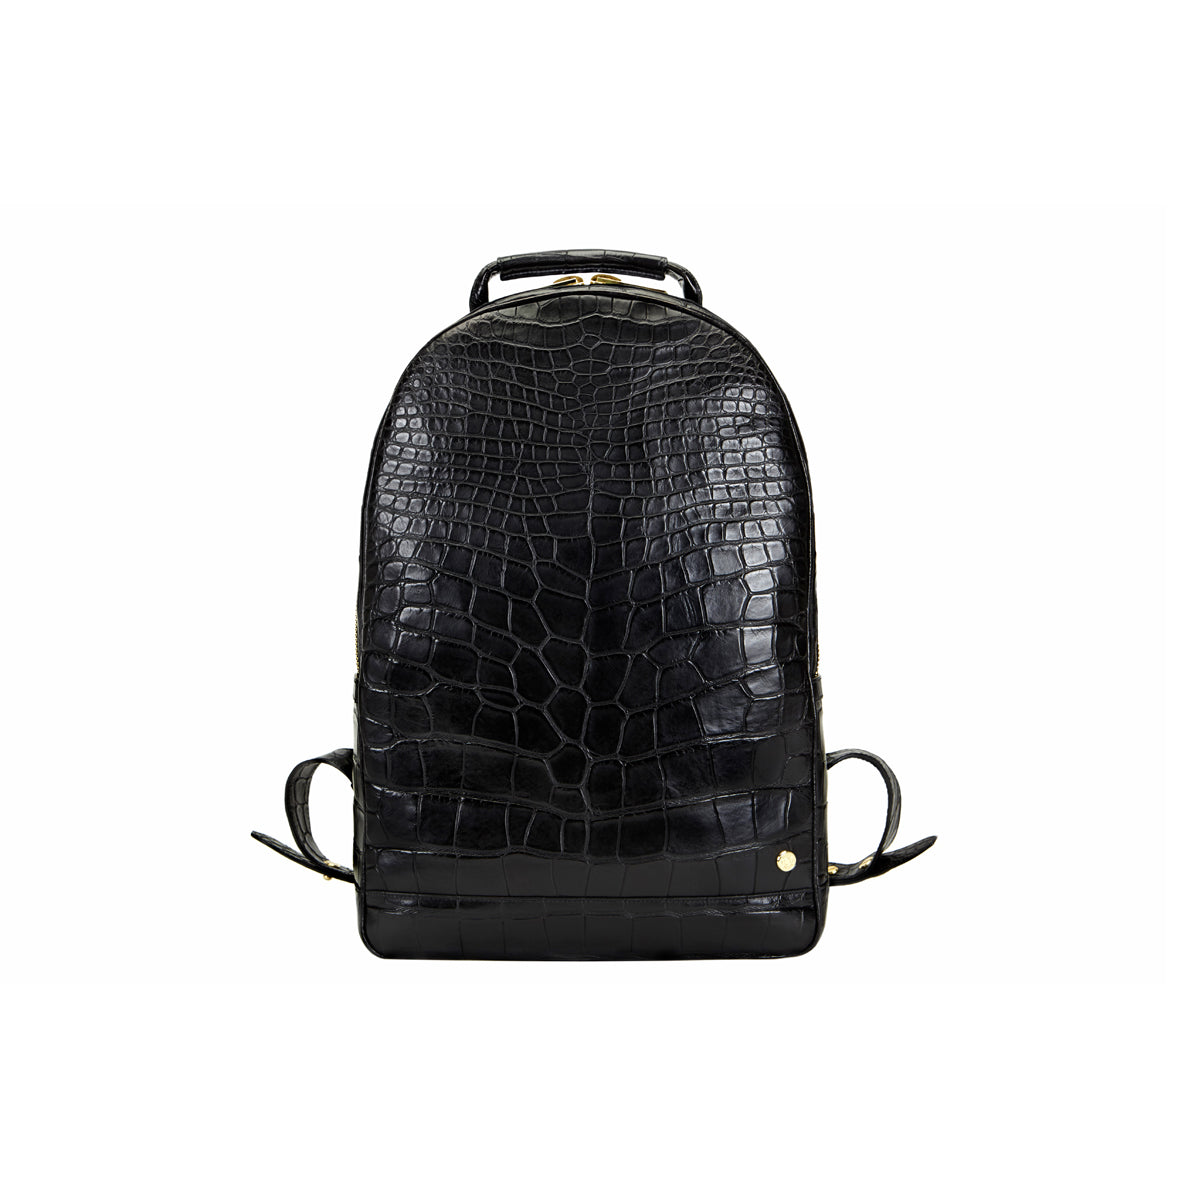 STALVEY Brighton Flat Front Backpack in Large Black Alligator Front View